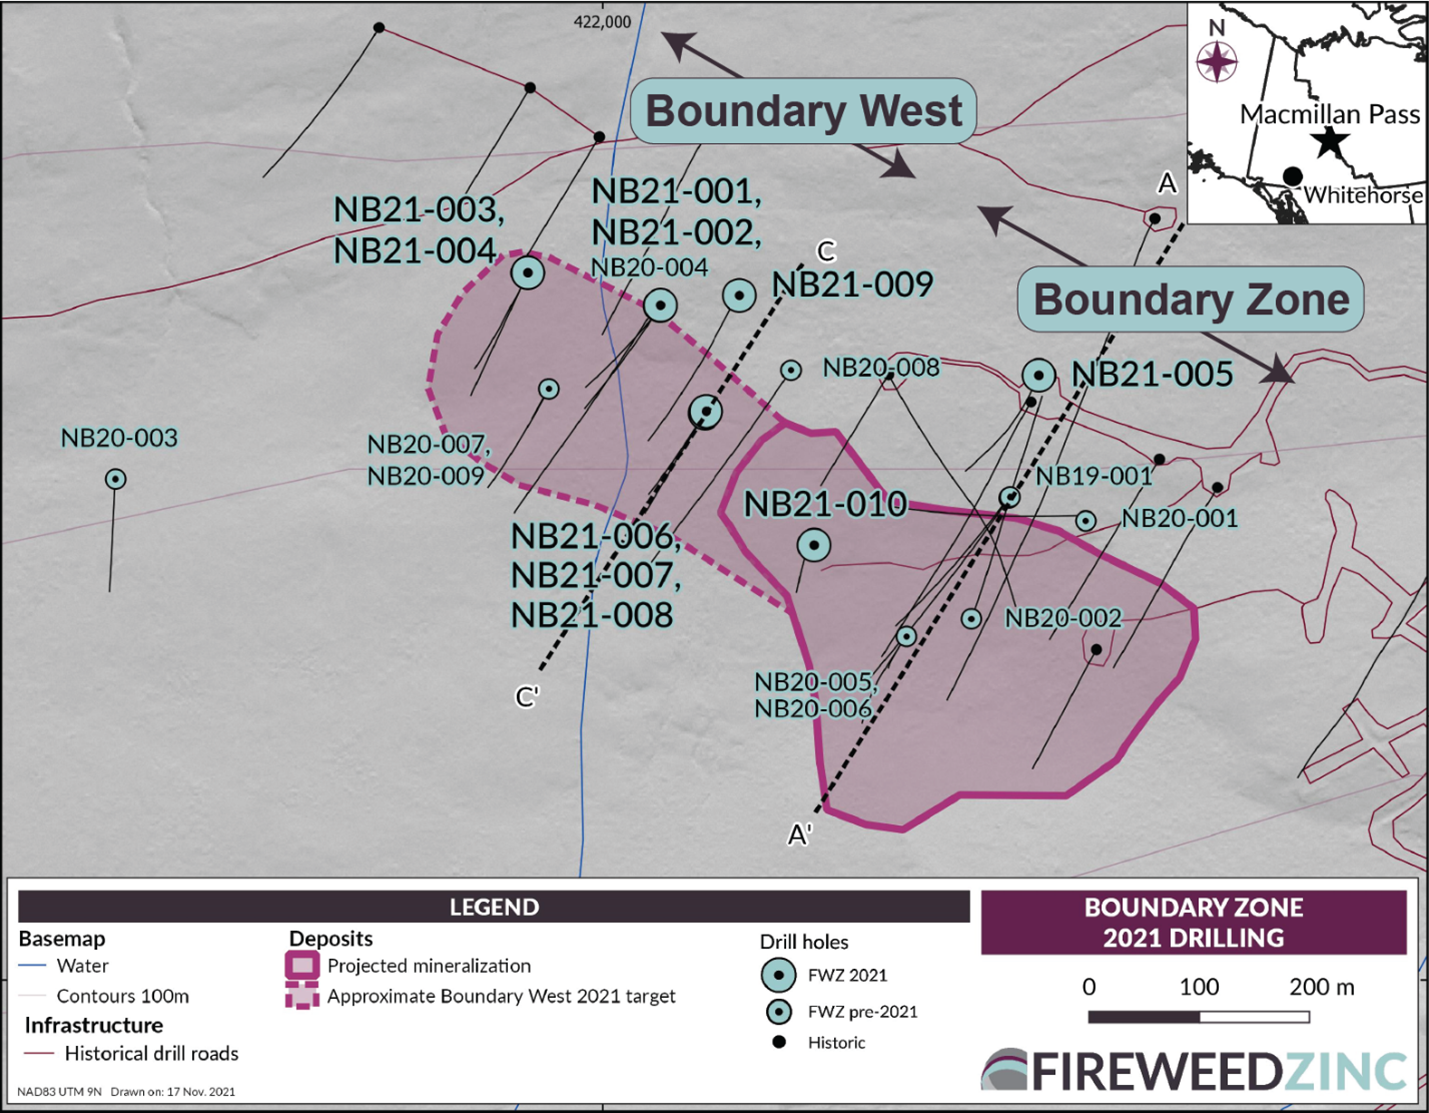 BOUNDARY ZONE 2021 DRILLING